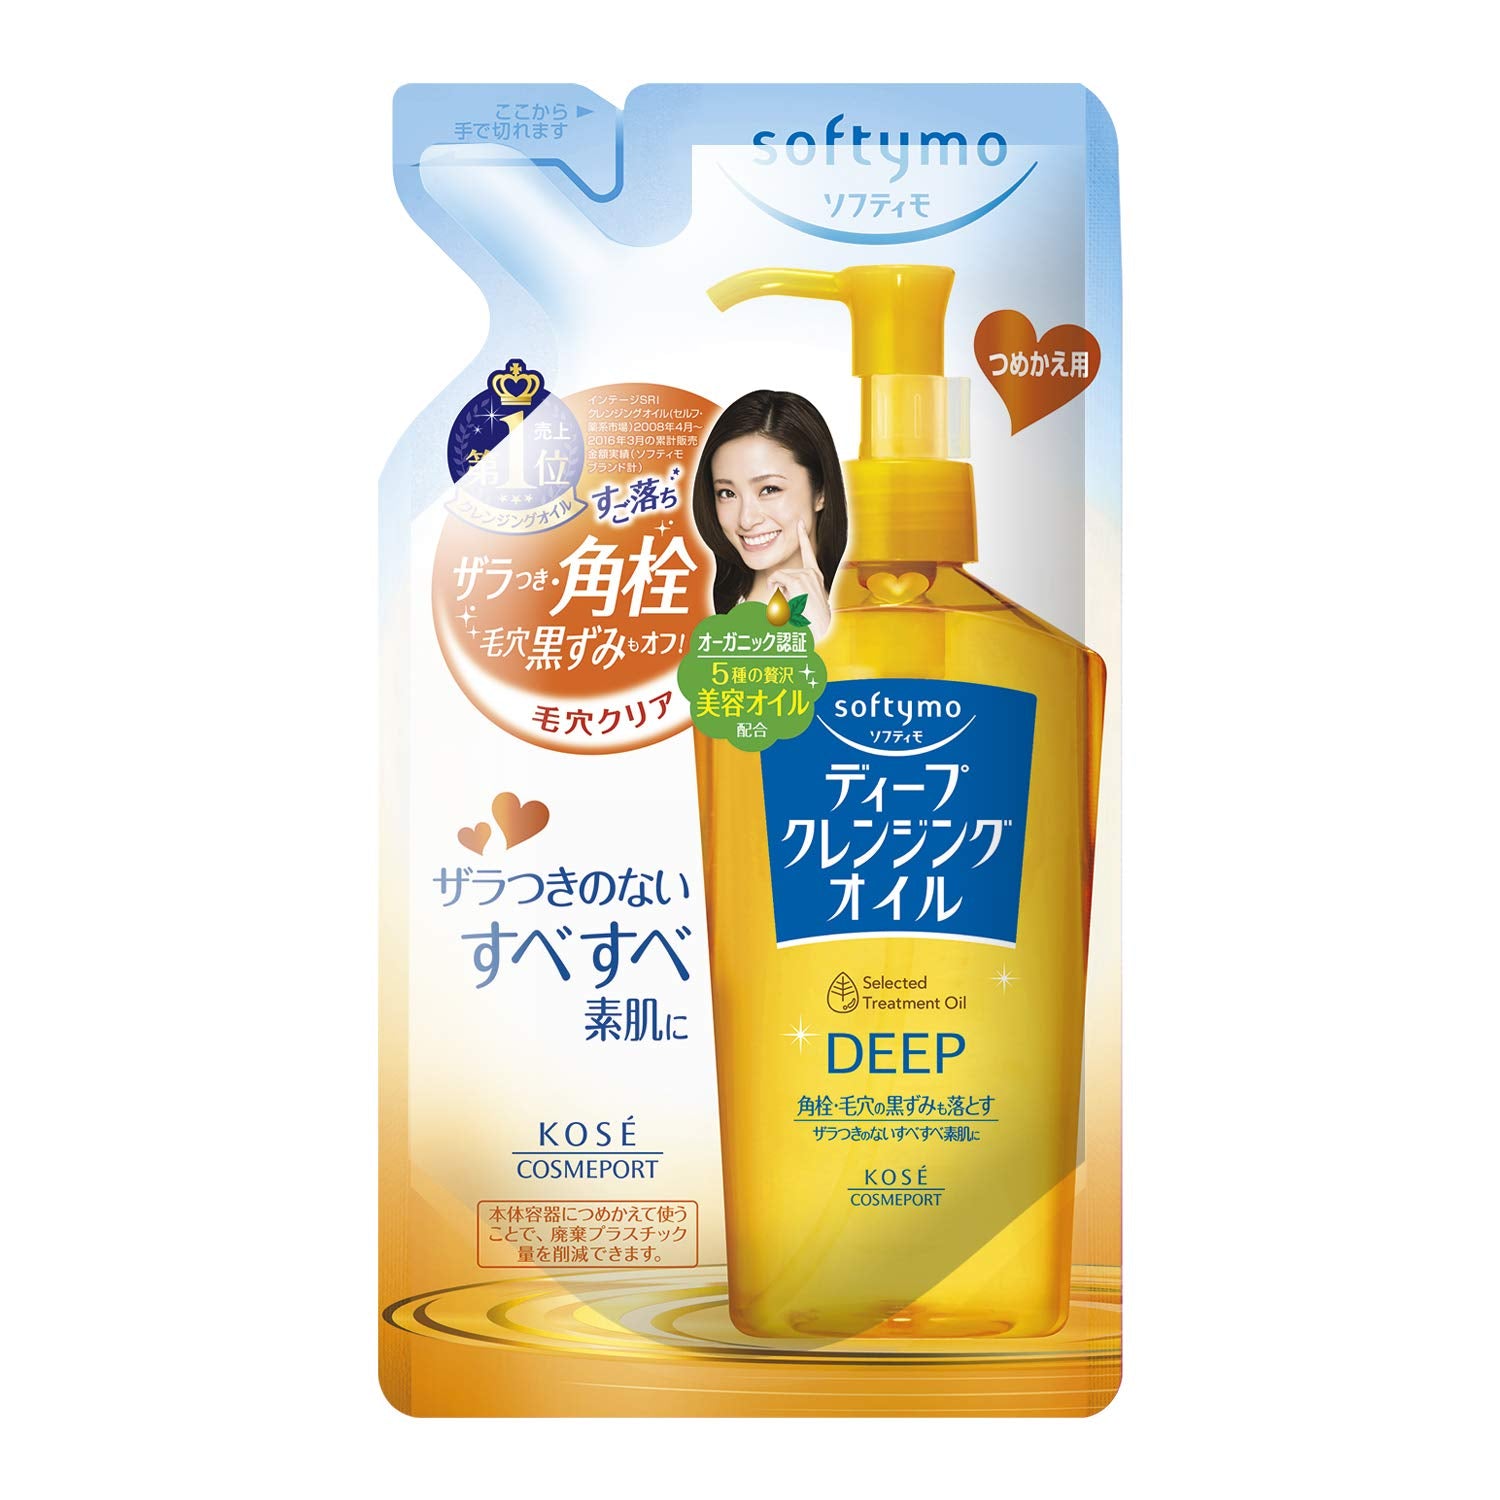 Kose Softymo Deep Cleansing Oil Refill Facial Cleansers Kose   